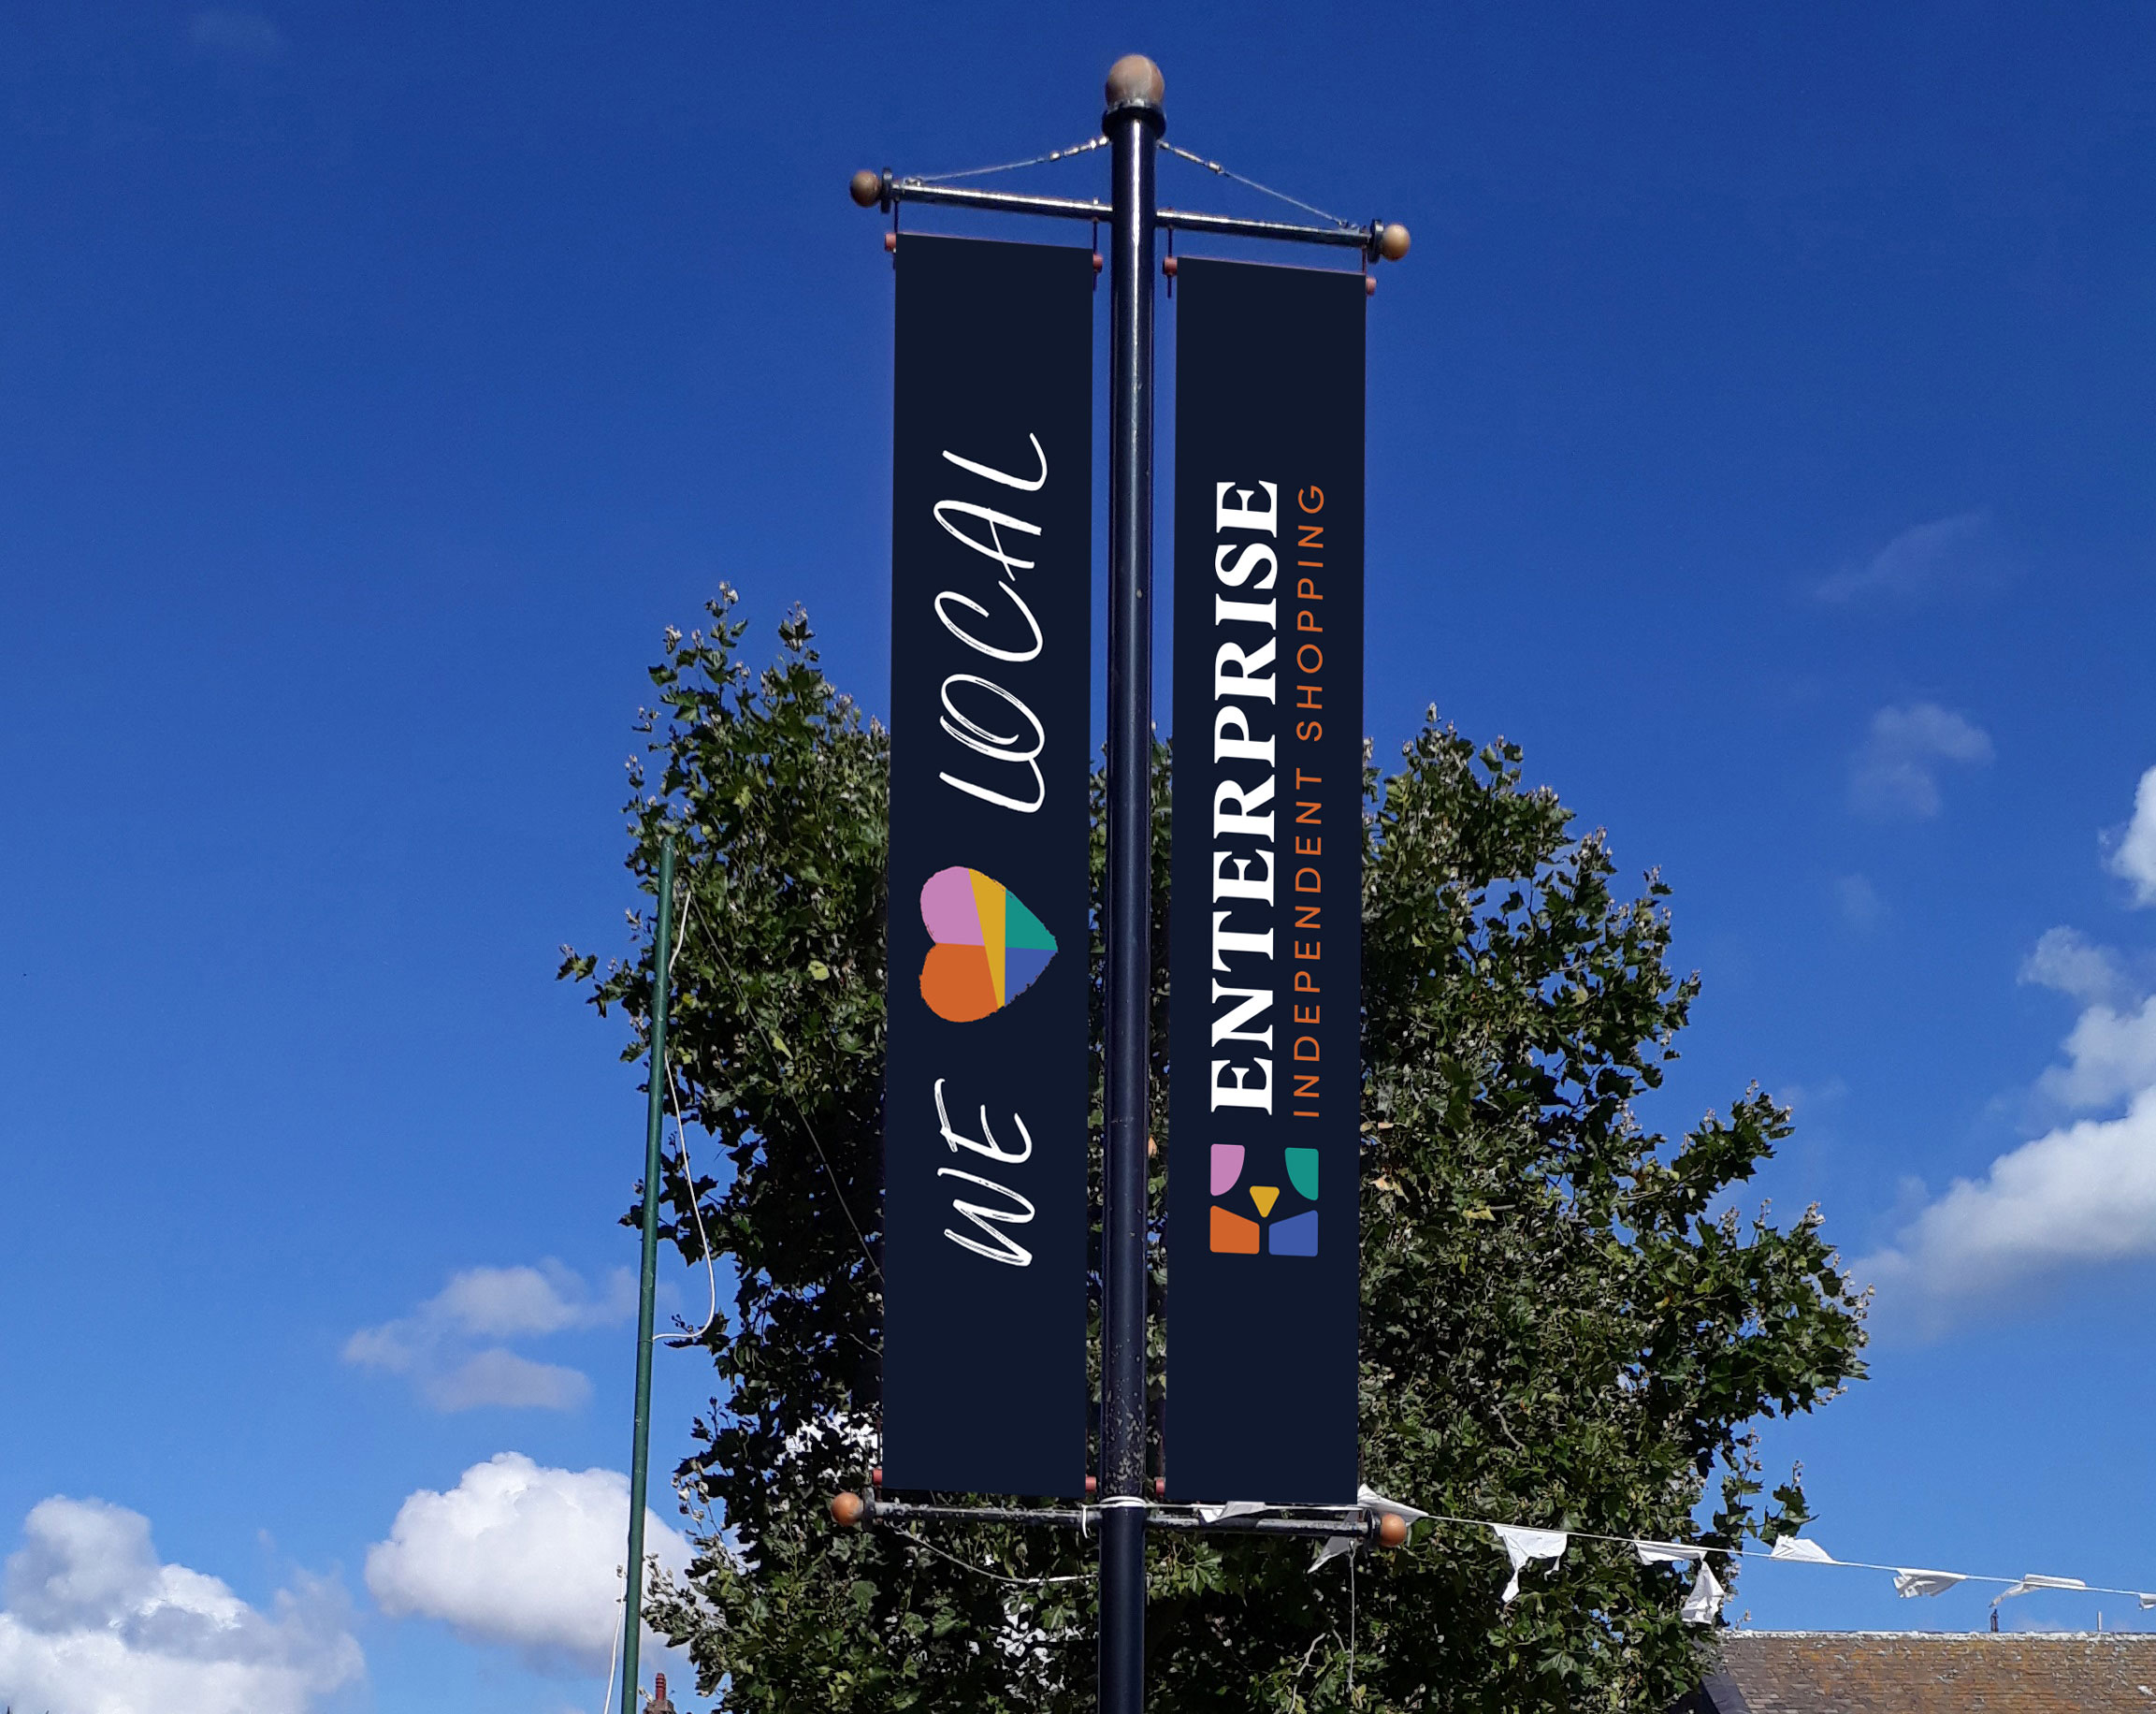 The Enterprise Centre front of house banners